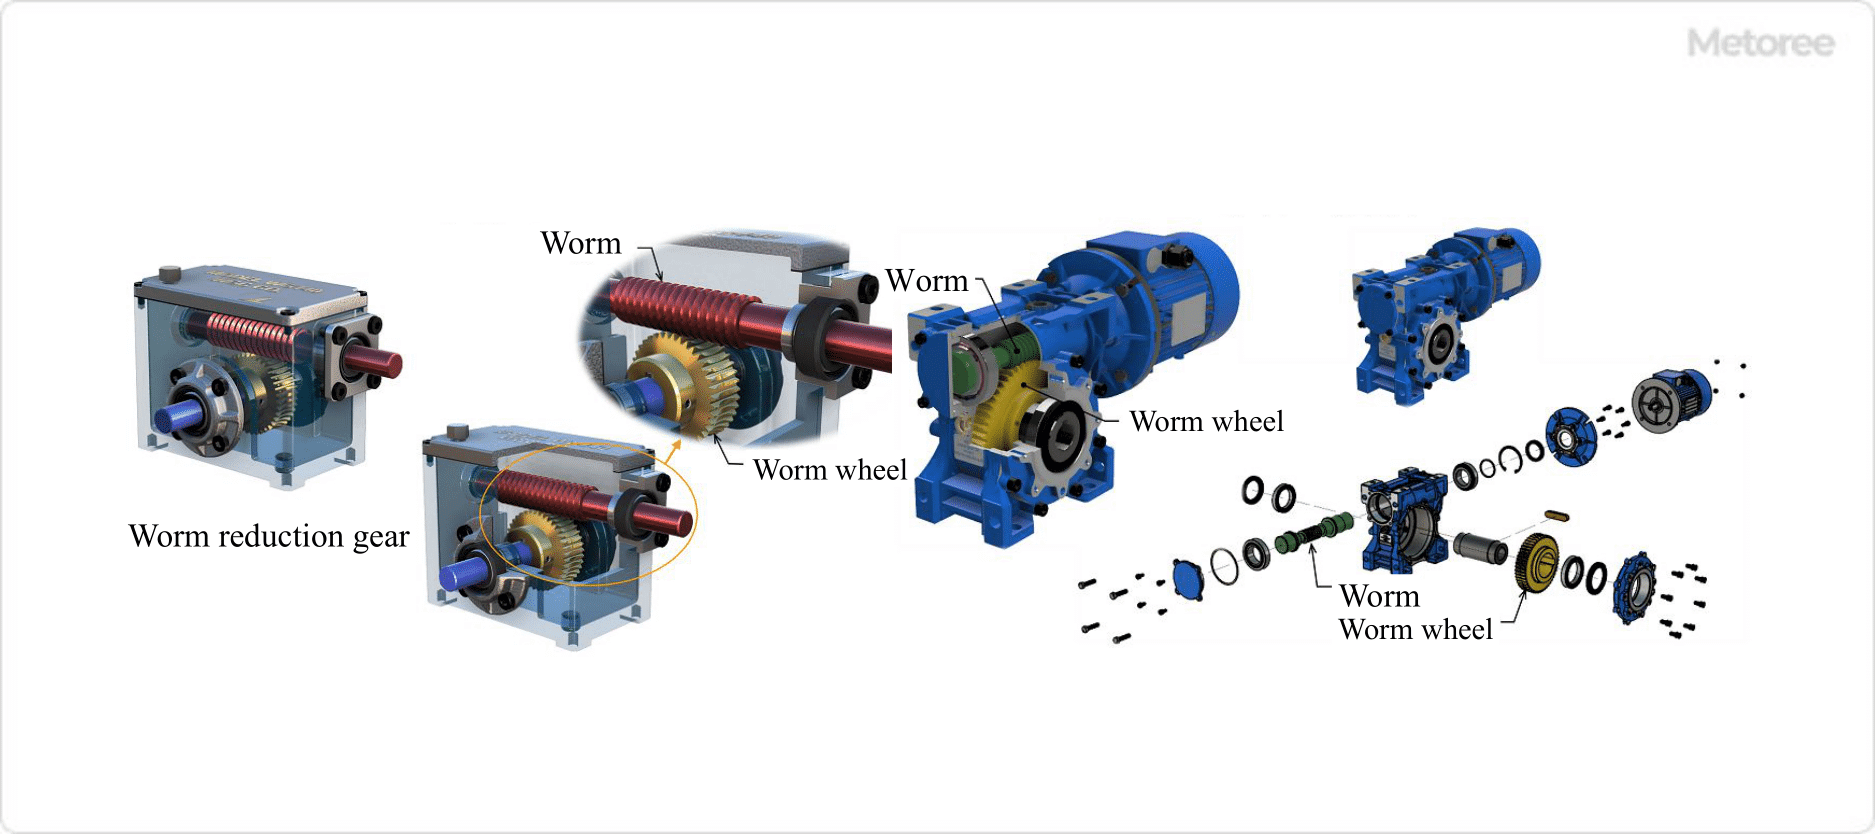 Figure 1. Structure of worm reduction gear